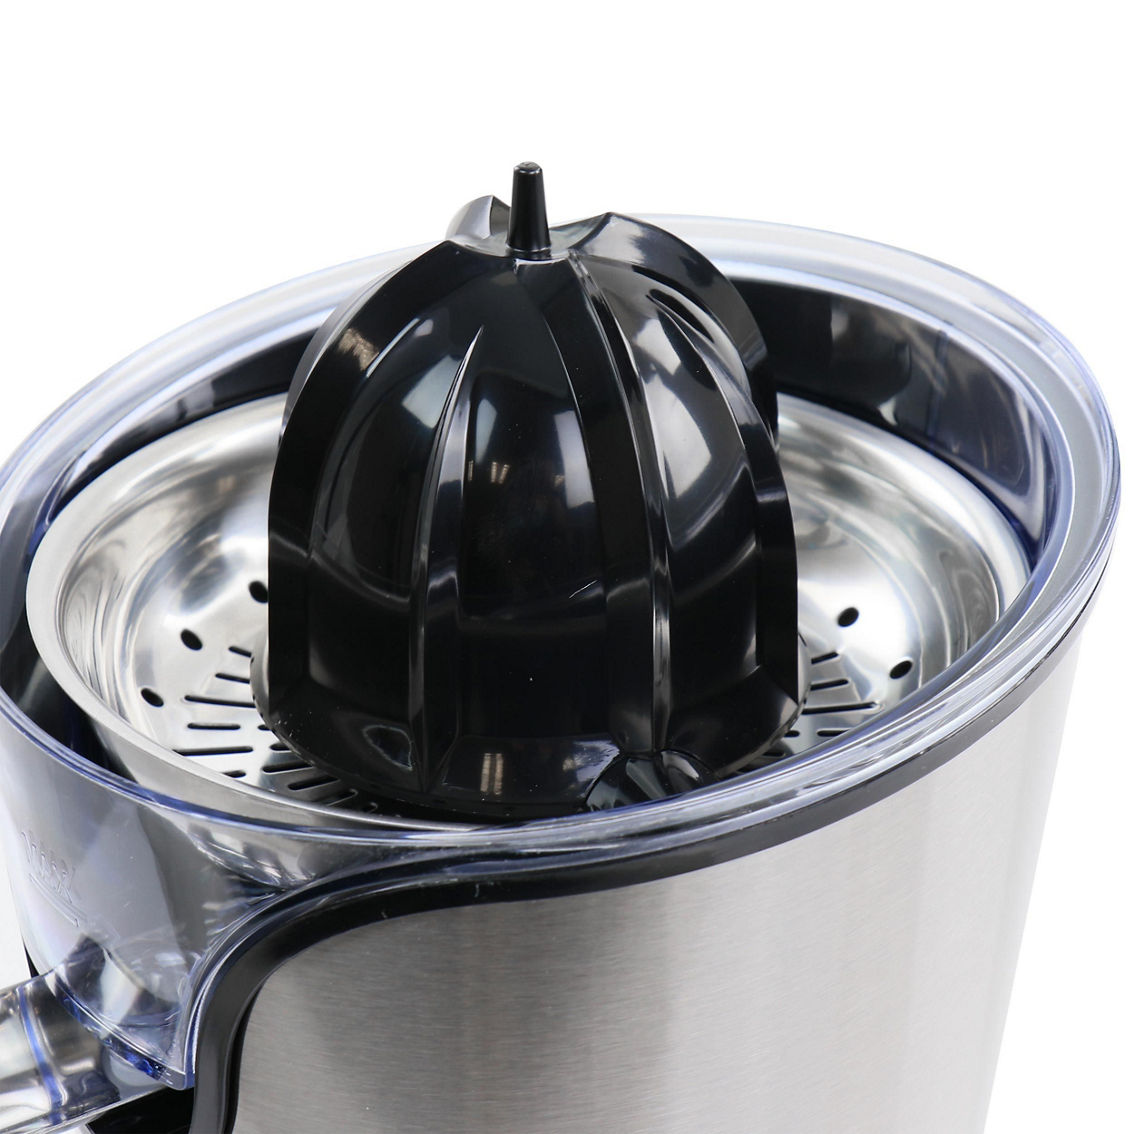 Better Chef Stainless Steel Electric Juice Press - Image 4 of 5